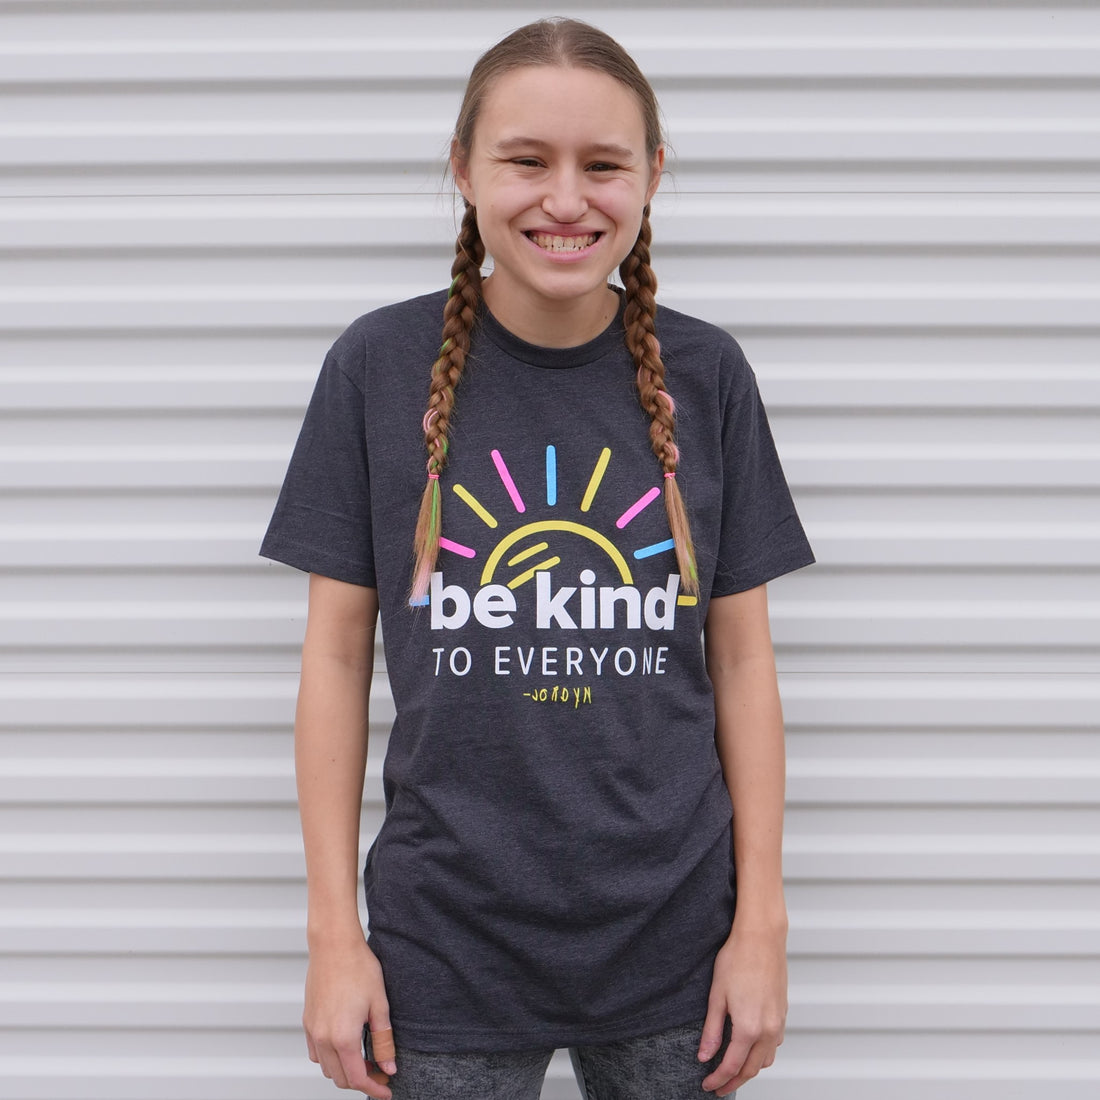 Jordyn is wearing our Sunshine Be Kind to Everyone® tee that features her signature.